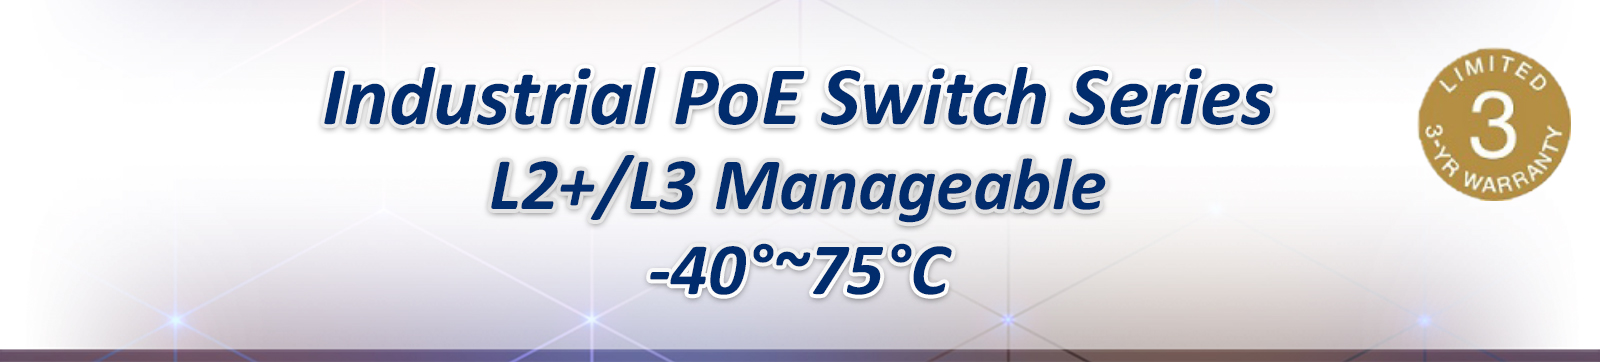 Industrial POE Switch Series